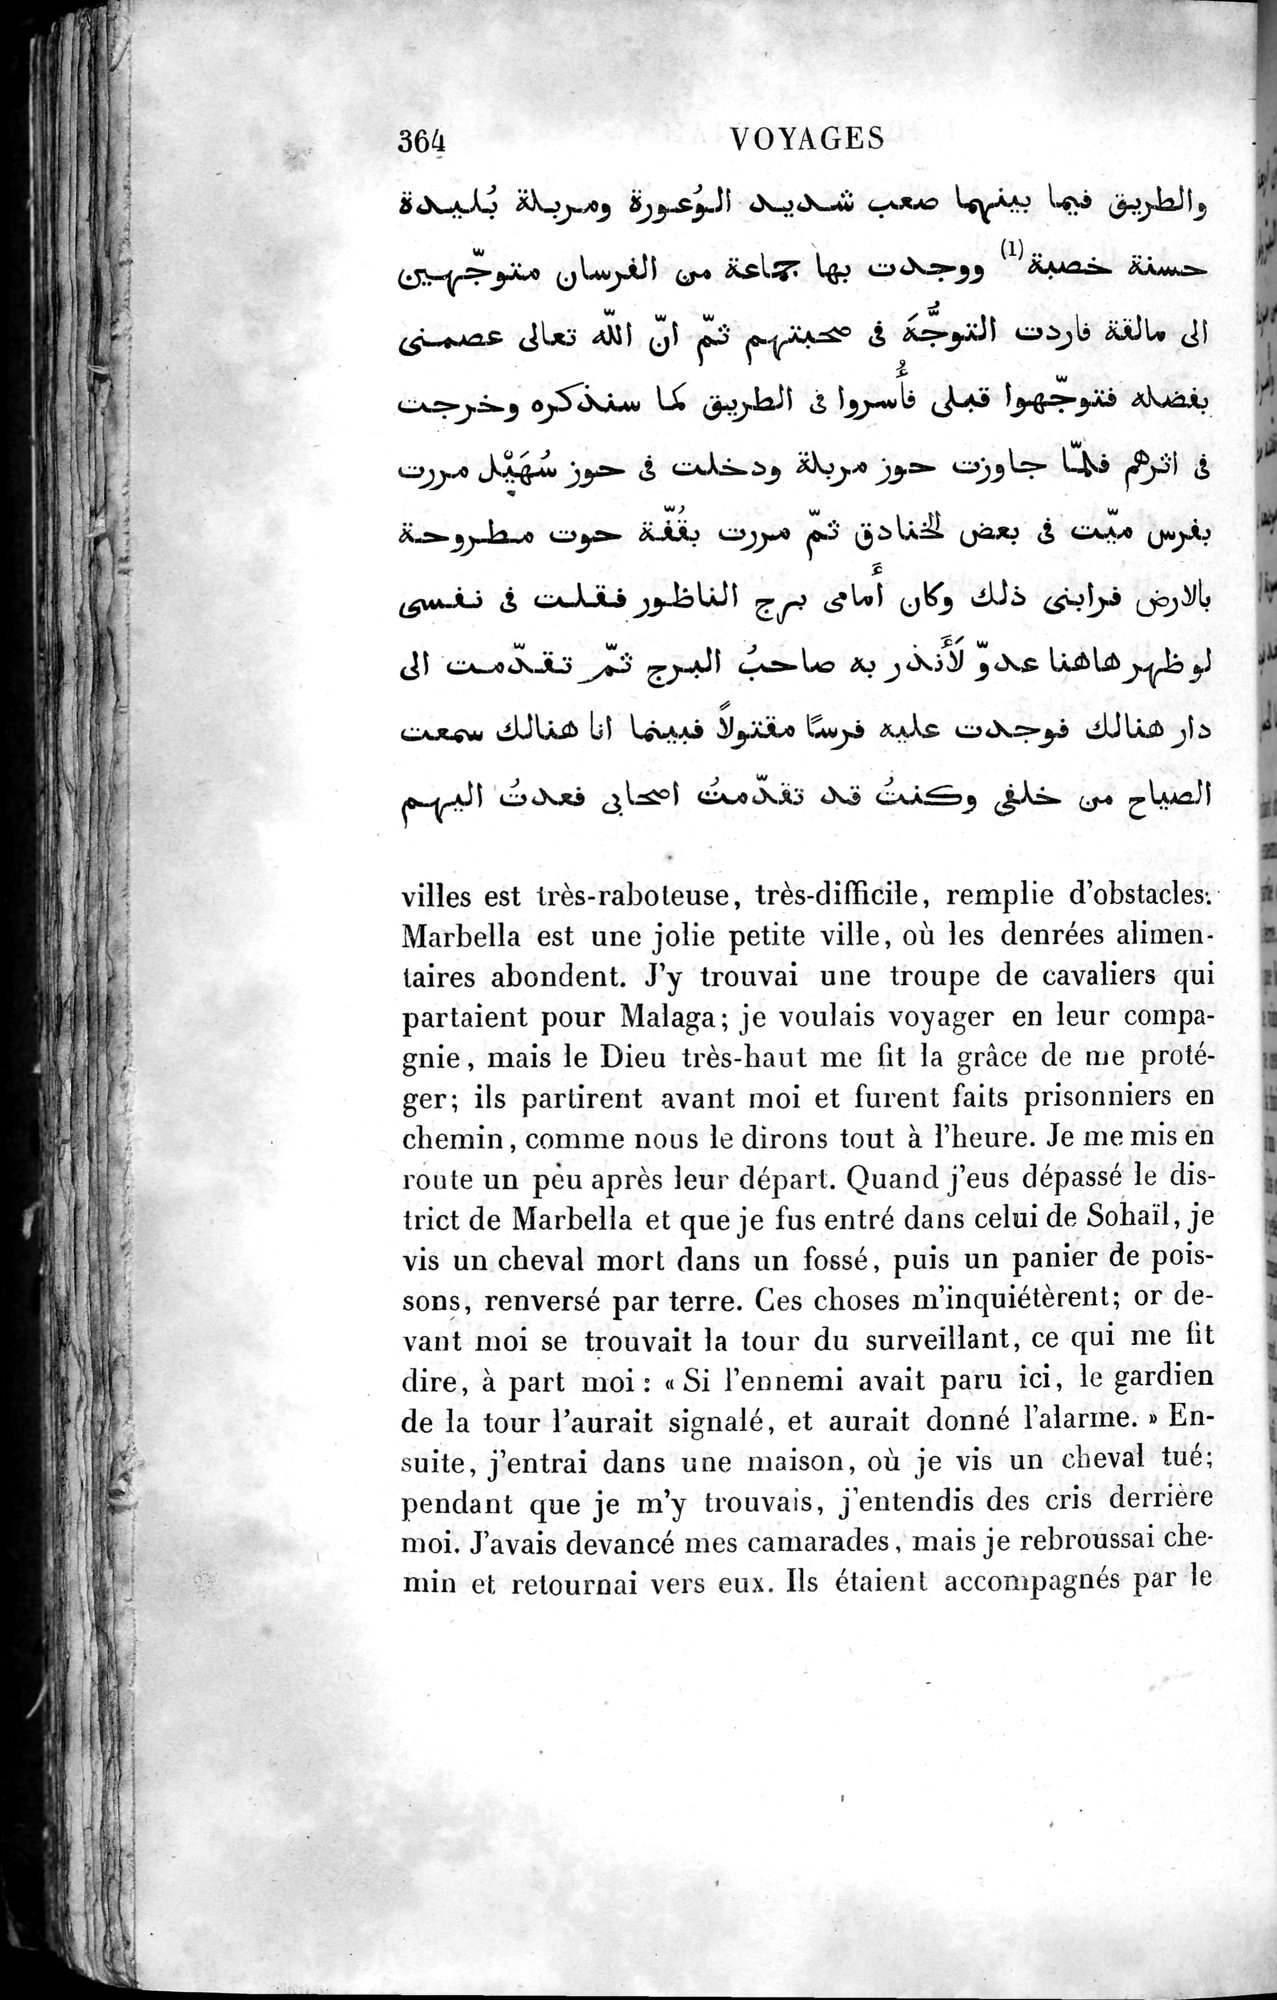 Voyages d'Ibn Batoutah : vol.4 / Page 376 (Grayscale High Resolution Image)